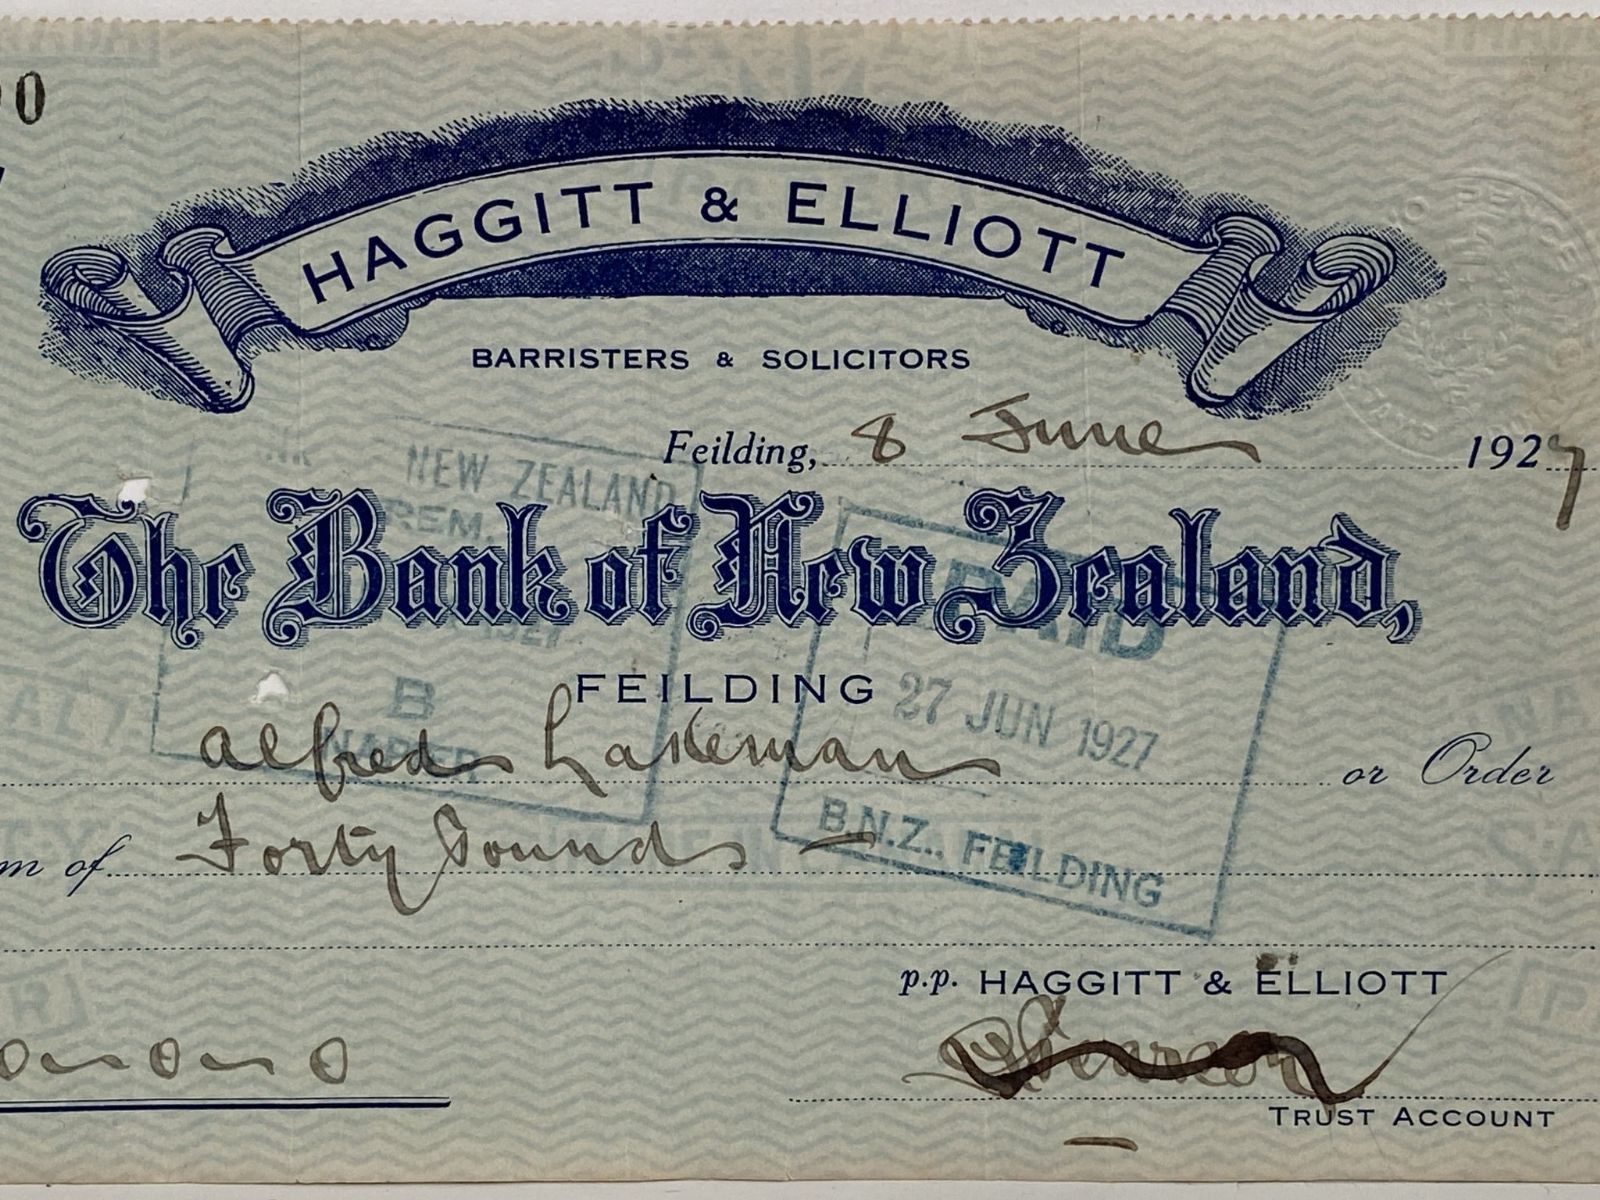 OLD BANKING MEMORABILIA: Bank cheque issued by BNZ Bank, Feilding 1927